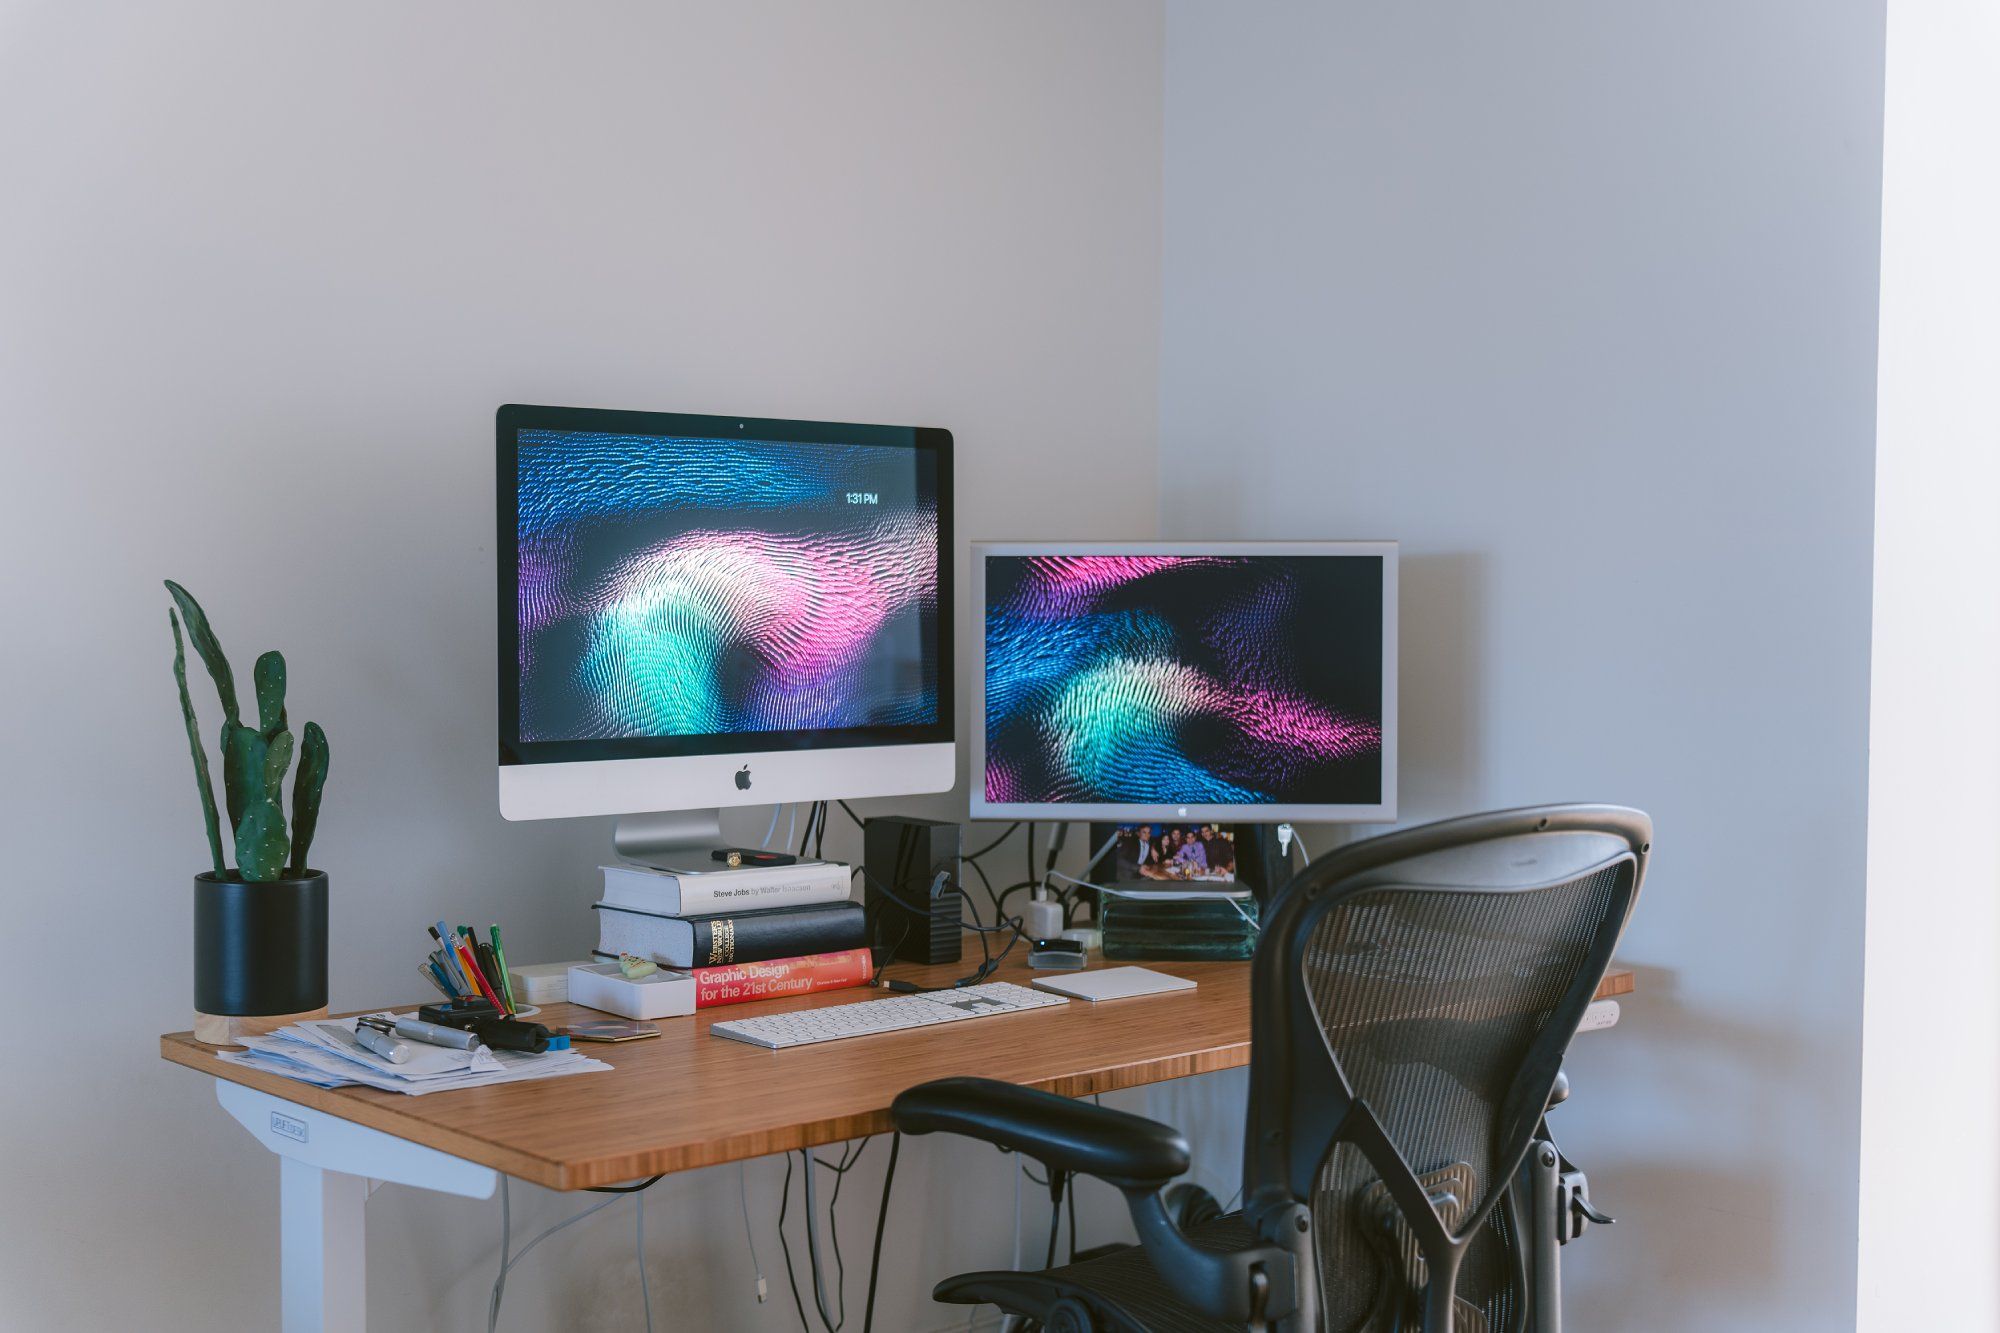 An organised home office setup showcasing an Apple iMac computer with a vibrant wave-patterned wallpaper, a secondary monitor displaying the same wallpaper, a potted cactus plant, a stack of design-related books, assorted writing utensils, and a comfortable ergonomic chair